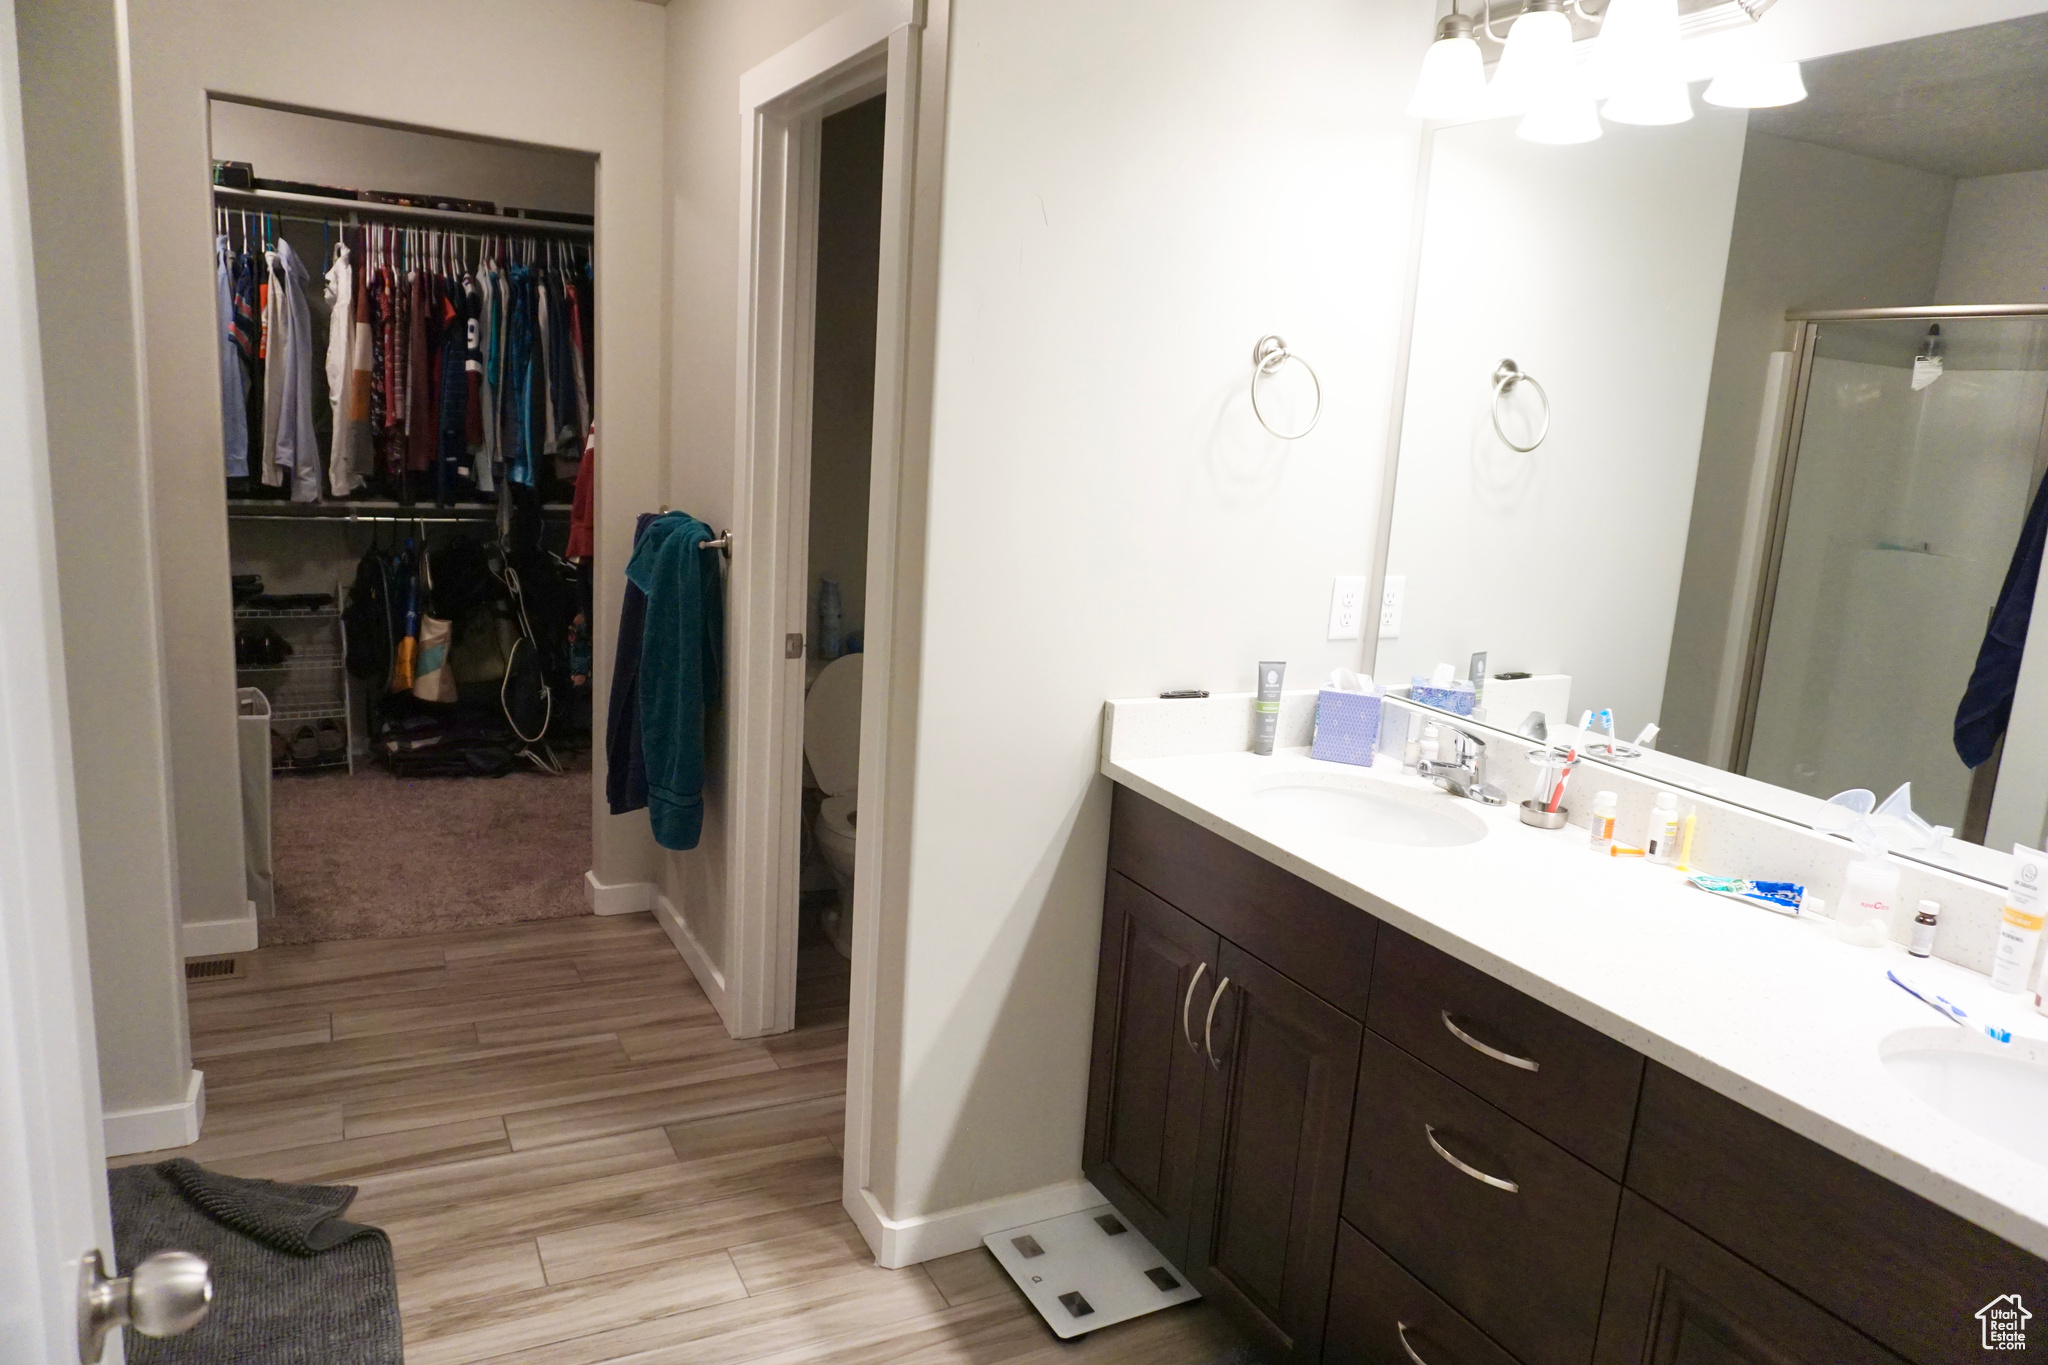 Bathroom with a shower, walk-in closet, dual sinks, vanity with extensive cabinet space, and toilet with door